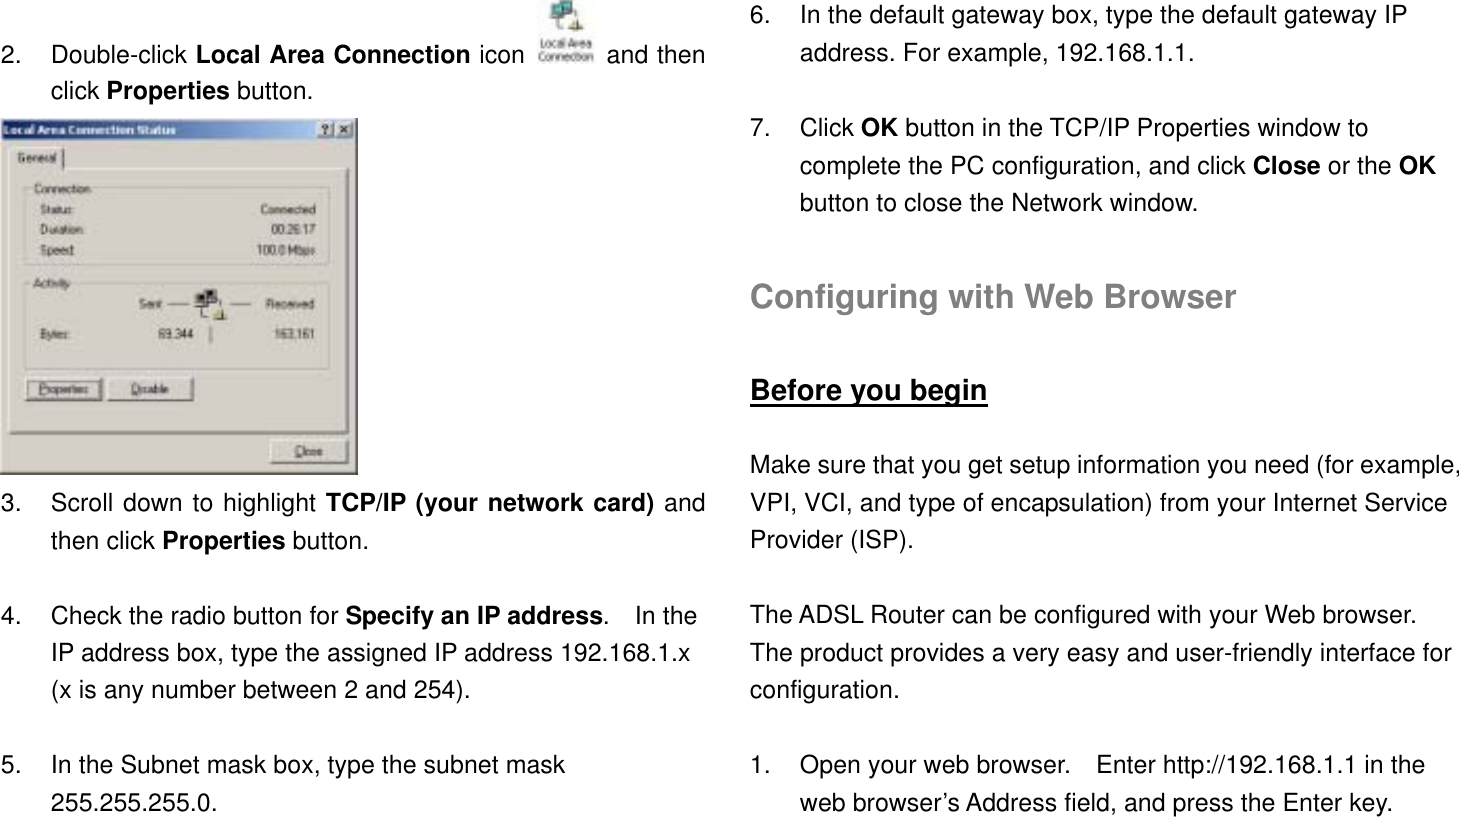 2. Double-click Local Area Connection icon   and then click Properties button.  3.  Scroll down to highlight TCP/IP (your network card) and then click Properties button.  4.  Check the radio button for Specify an IP address.  In the IP address box, type the assigned IP address 192.168.1.x (x is any number between 2 and 254).  5.  In the Subnet mask box, type the subnet mask 255.255.255.0.  6.  In the default gateway box, type the default gateway IP address. For example, 192.168.1.1.  7. Click OK button in the TCP/IP Properties window to complete the PC configuration, and click Close or the OK button to close the Network window.  Configuring with Web Browser  Before you begin  Make sure that you get setup information you need (for example, VPI, VCI, and type of encapsulation) from your Internet Service Provider (ISP).  The ADSL Router can be configured with your Web browser. The product provides a very easy and user-friendly interface for configuration.  1.  Open your web browser.    Enter http://192.168.1.1 in the web browser’s Address field, and press the Enter key. 